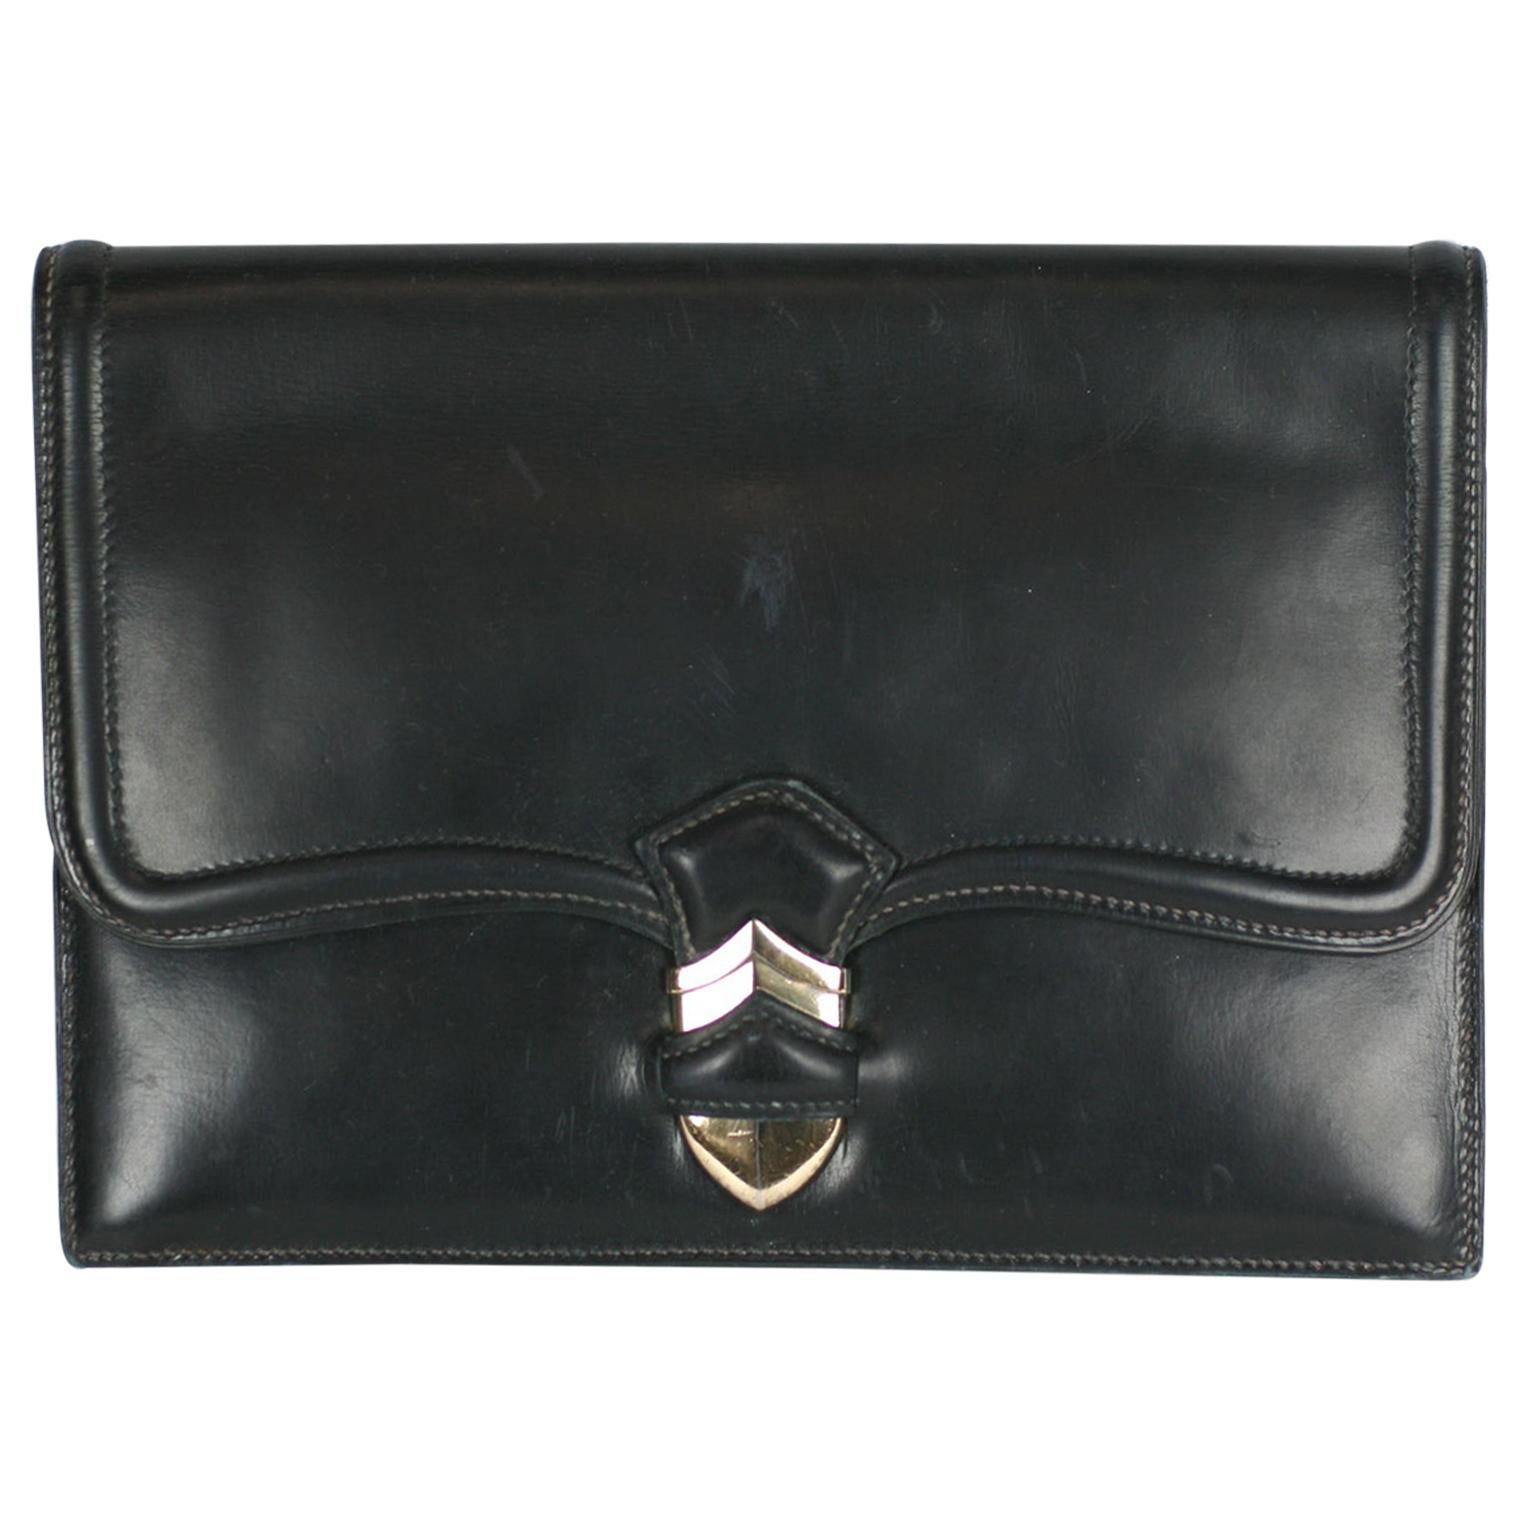  Hermes Navy Calf Pan Clutch with Sterling Silver Hardware For Sale